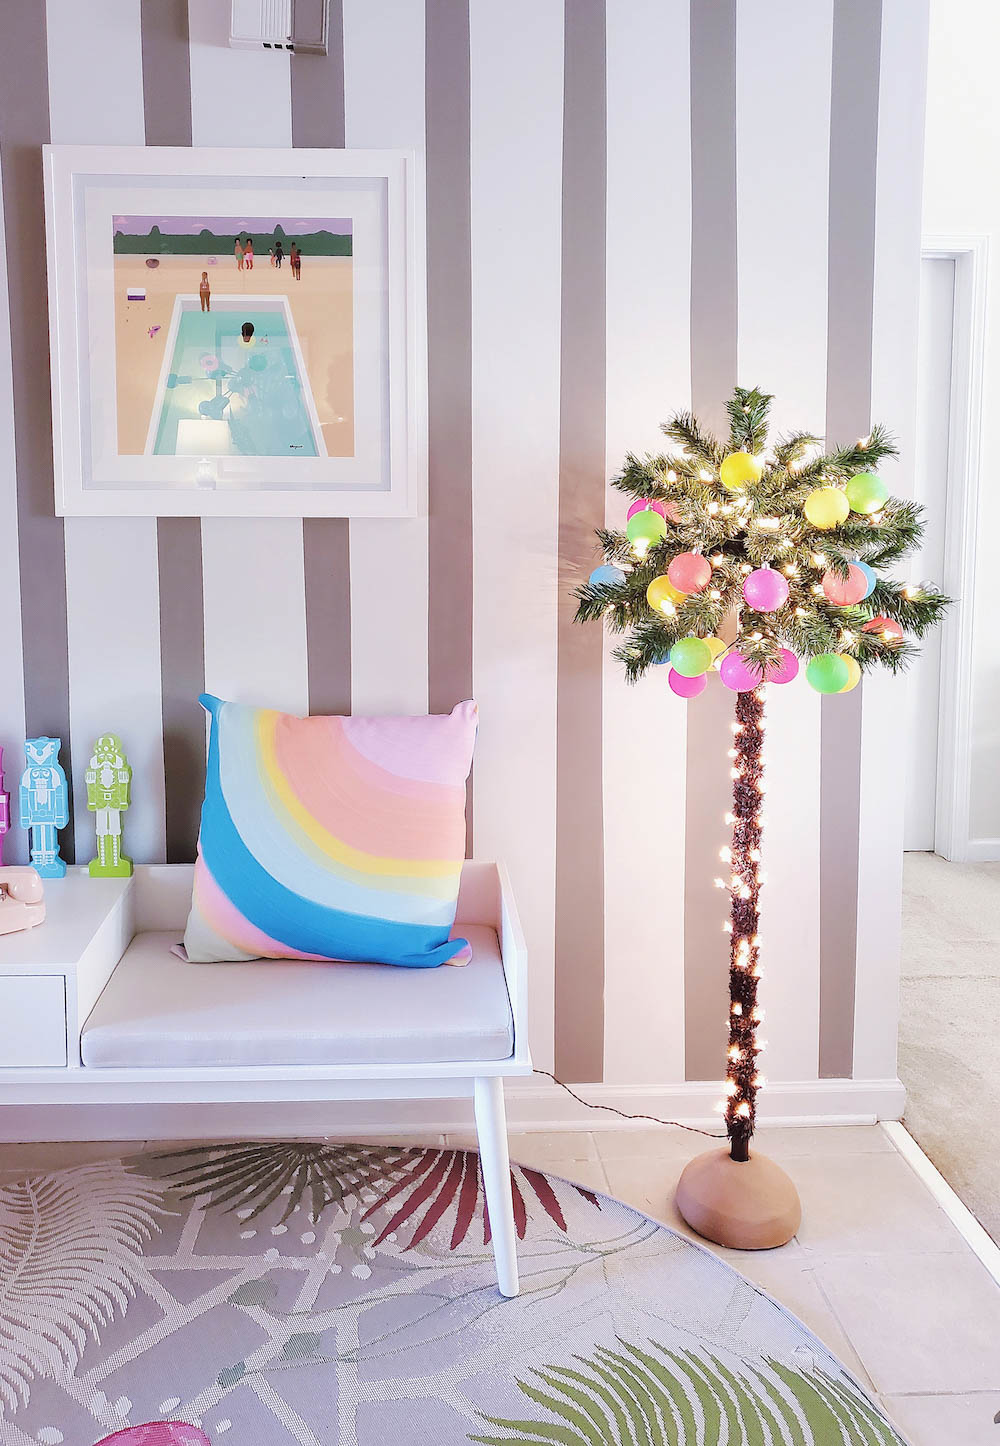 A small indoor palm tree decorated with ornaments and lights positioned next to a bench and in front of a striped wall